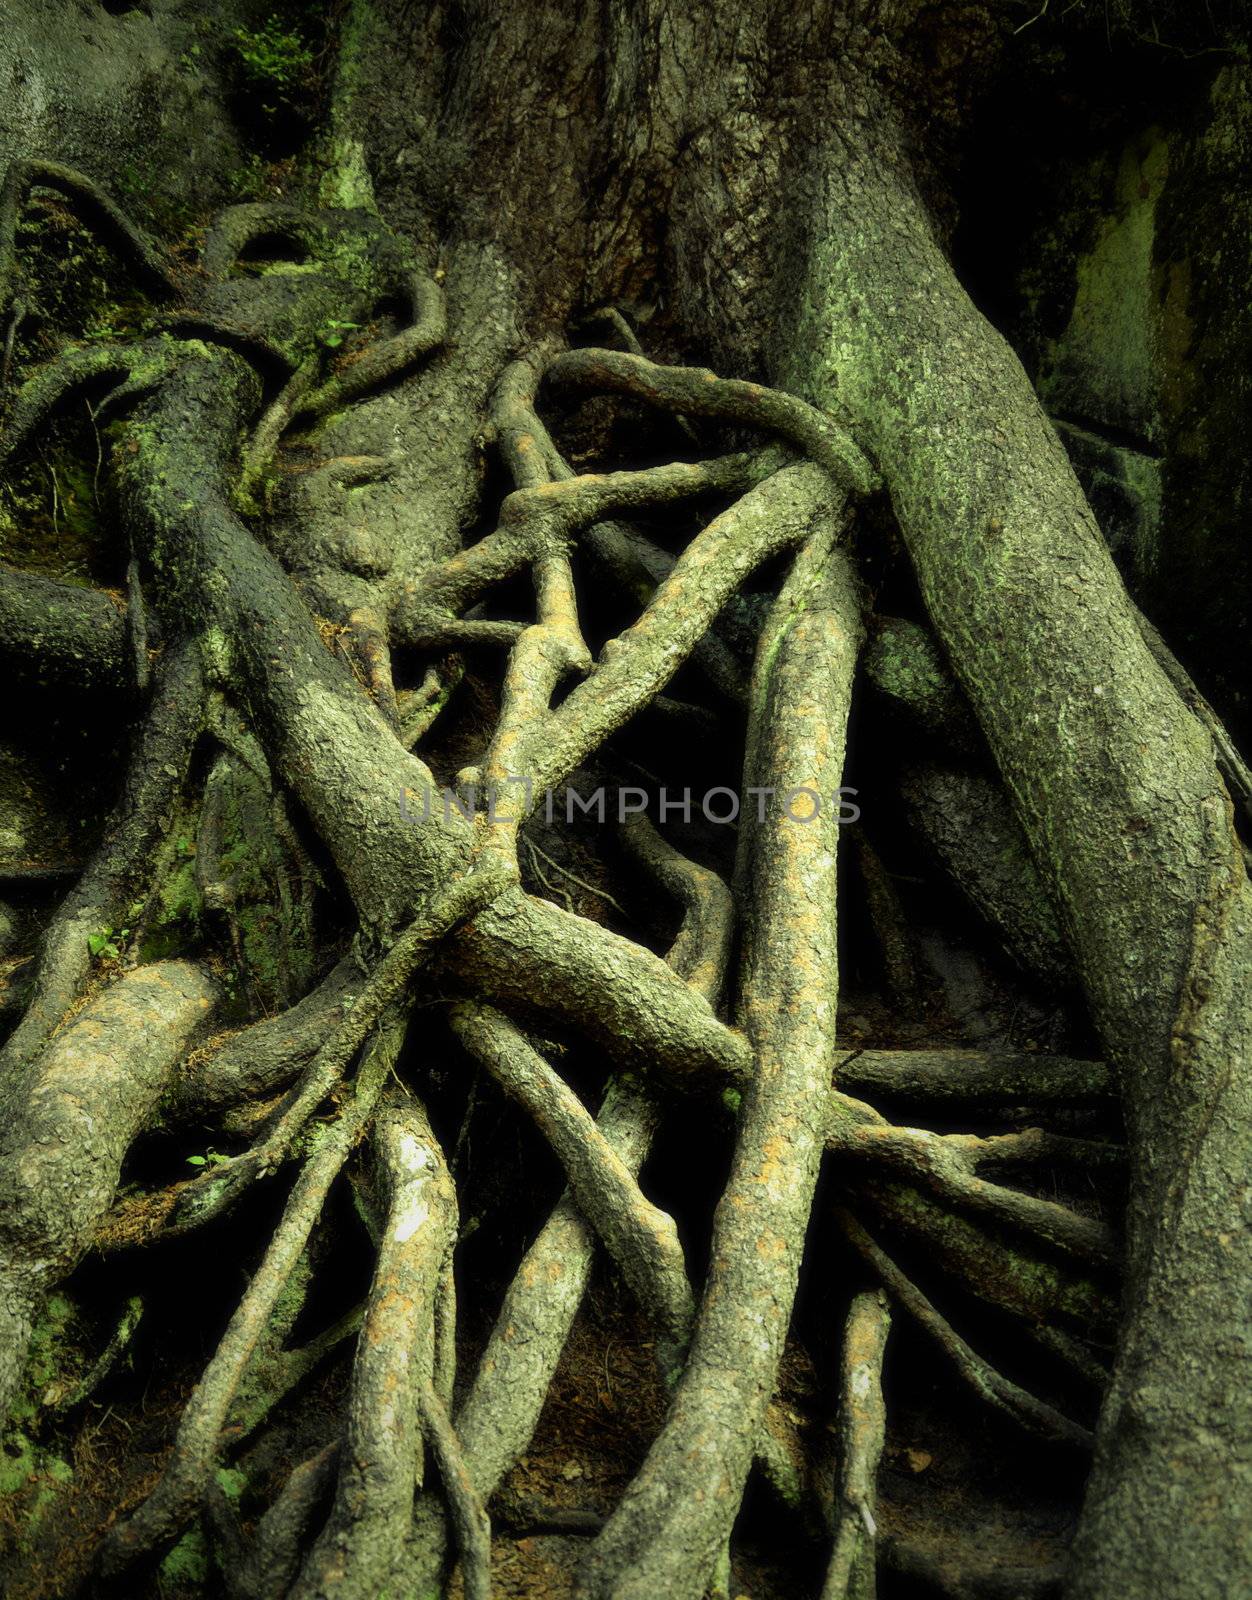 background spooky tree roots intertwined one another